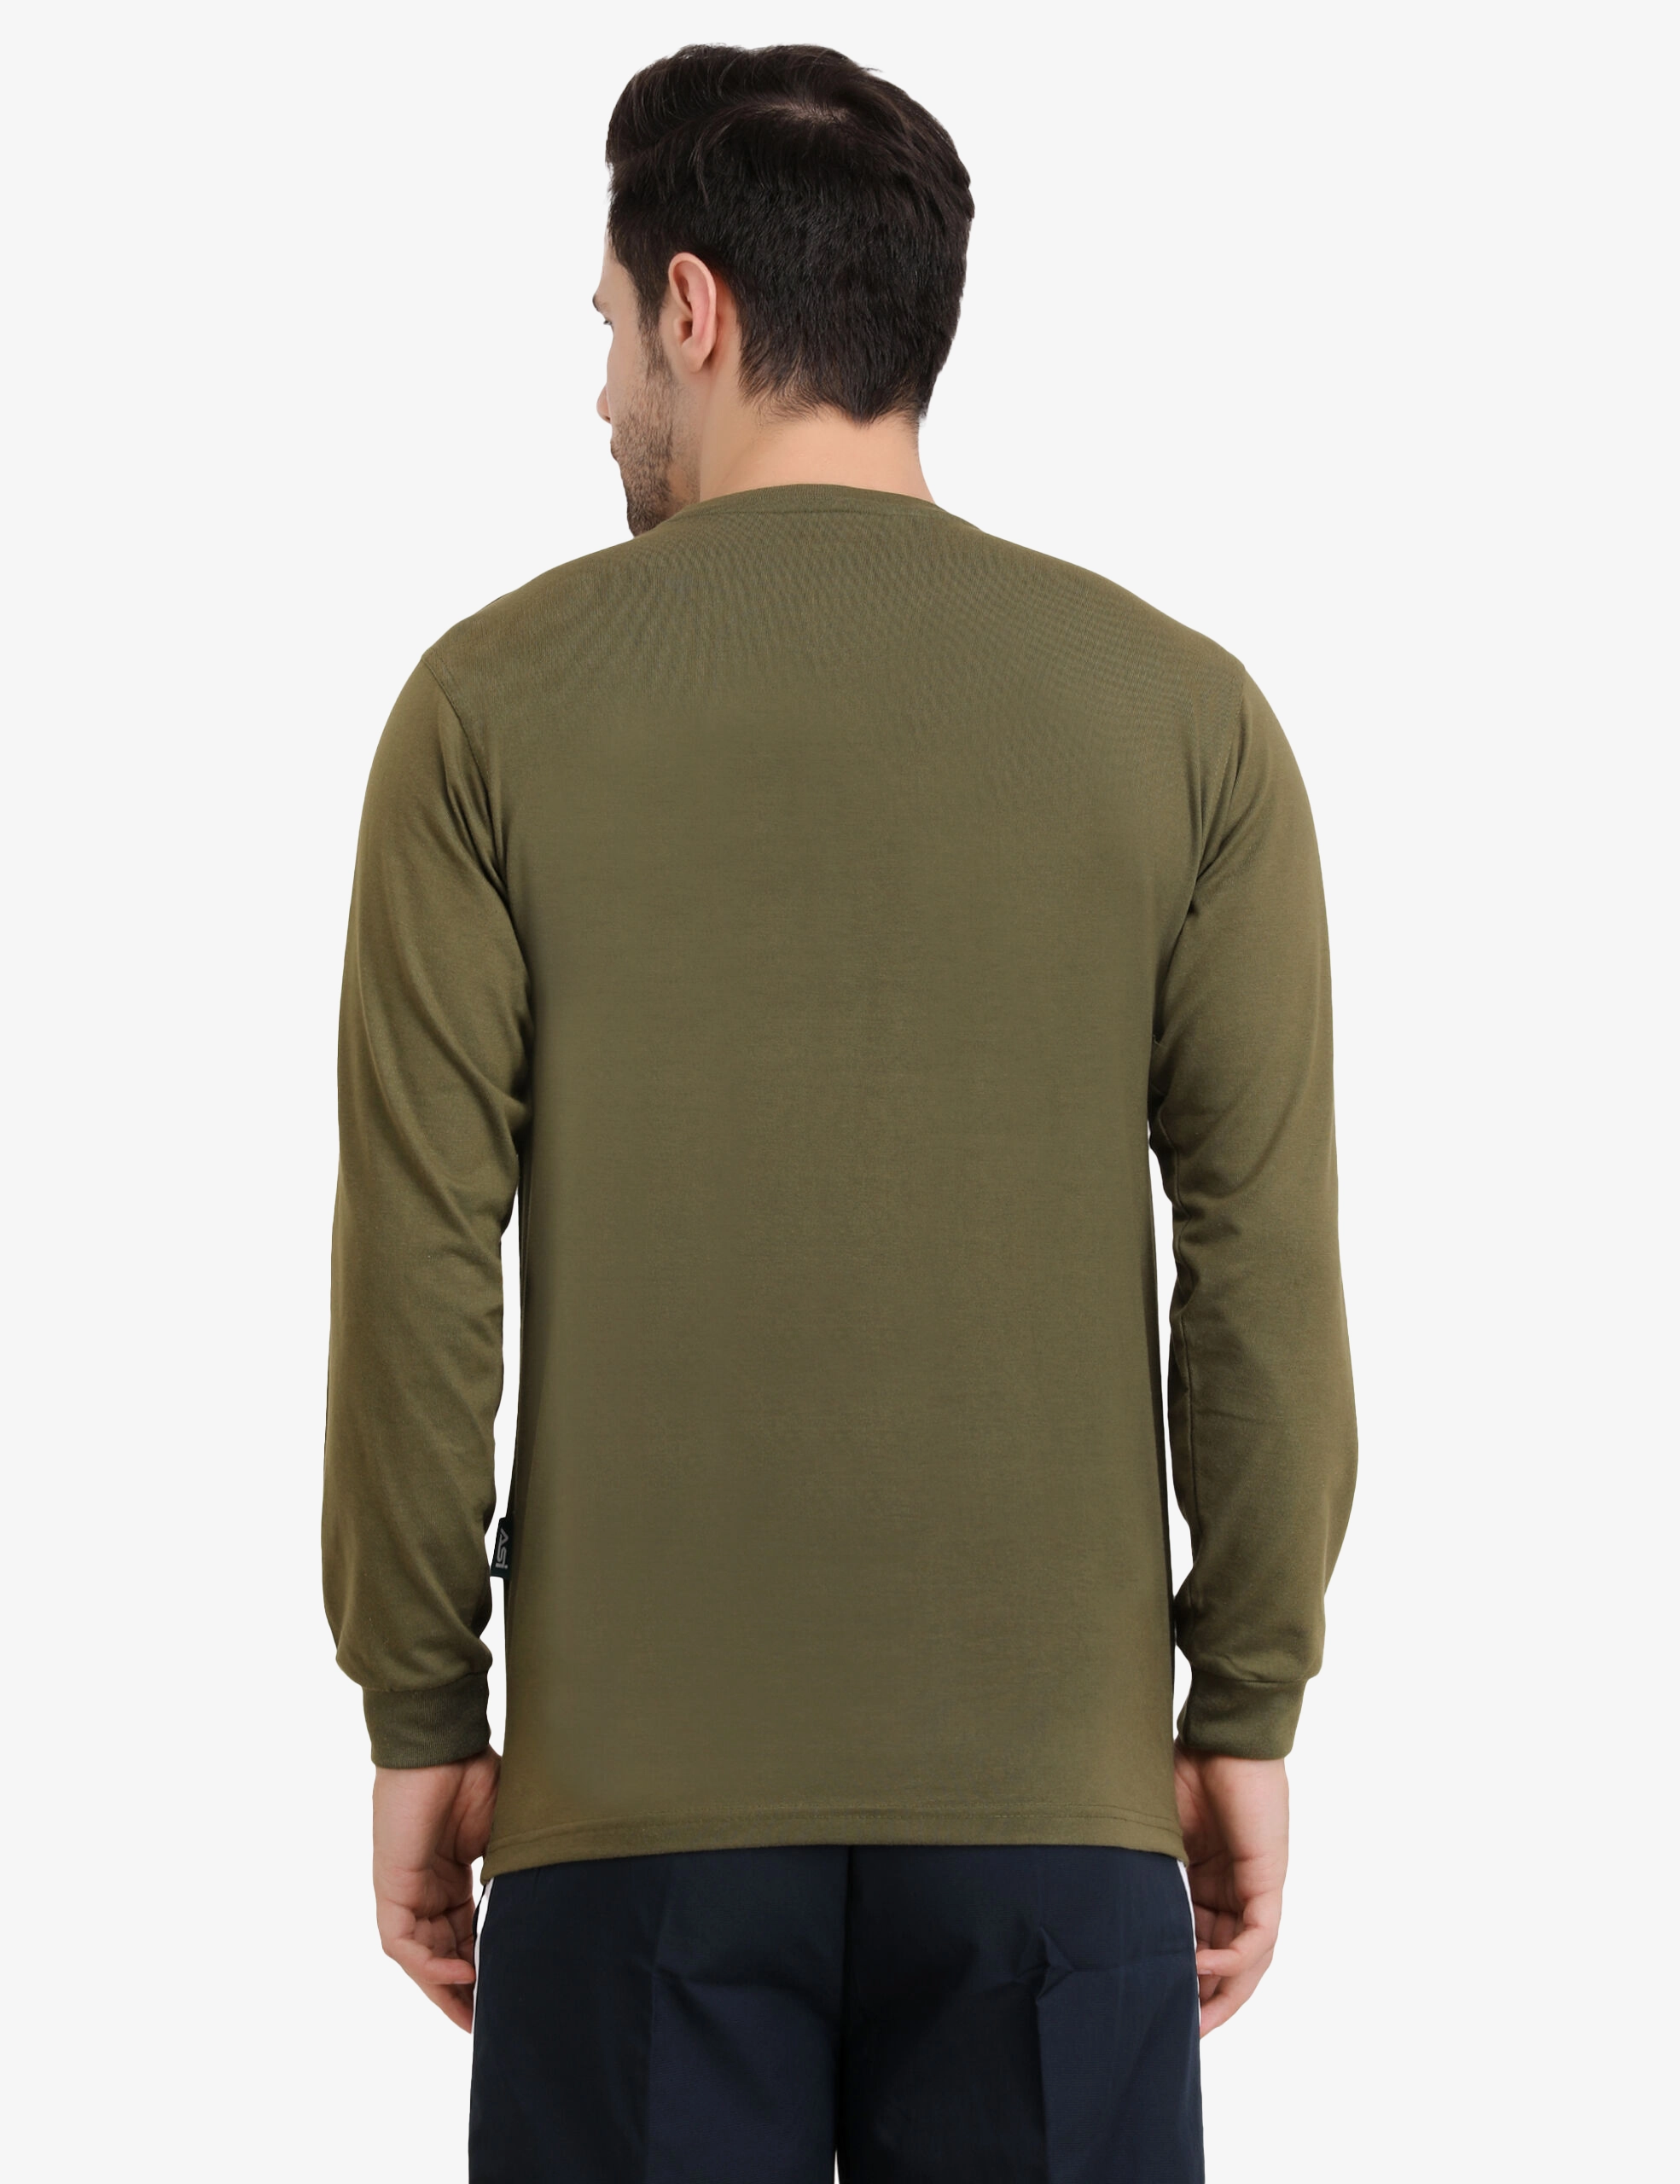 ASI Charge Olive Green T-Shirt for Men